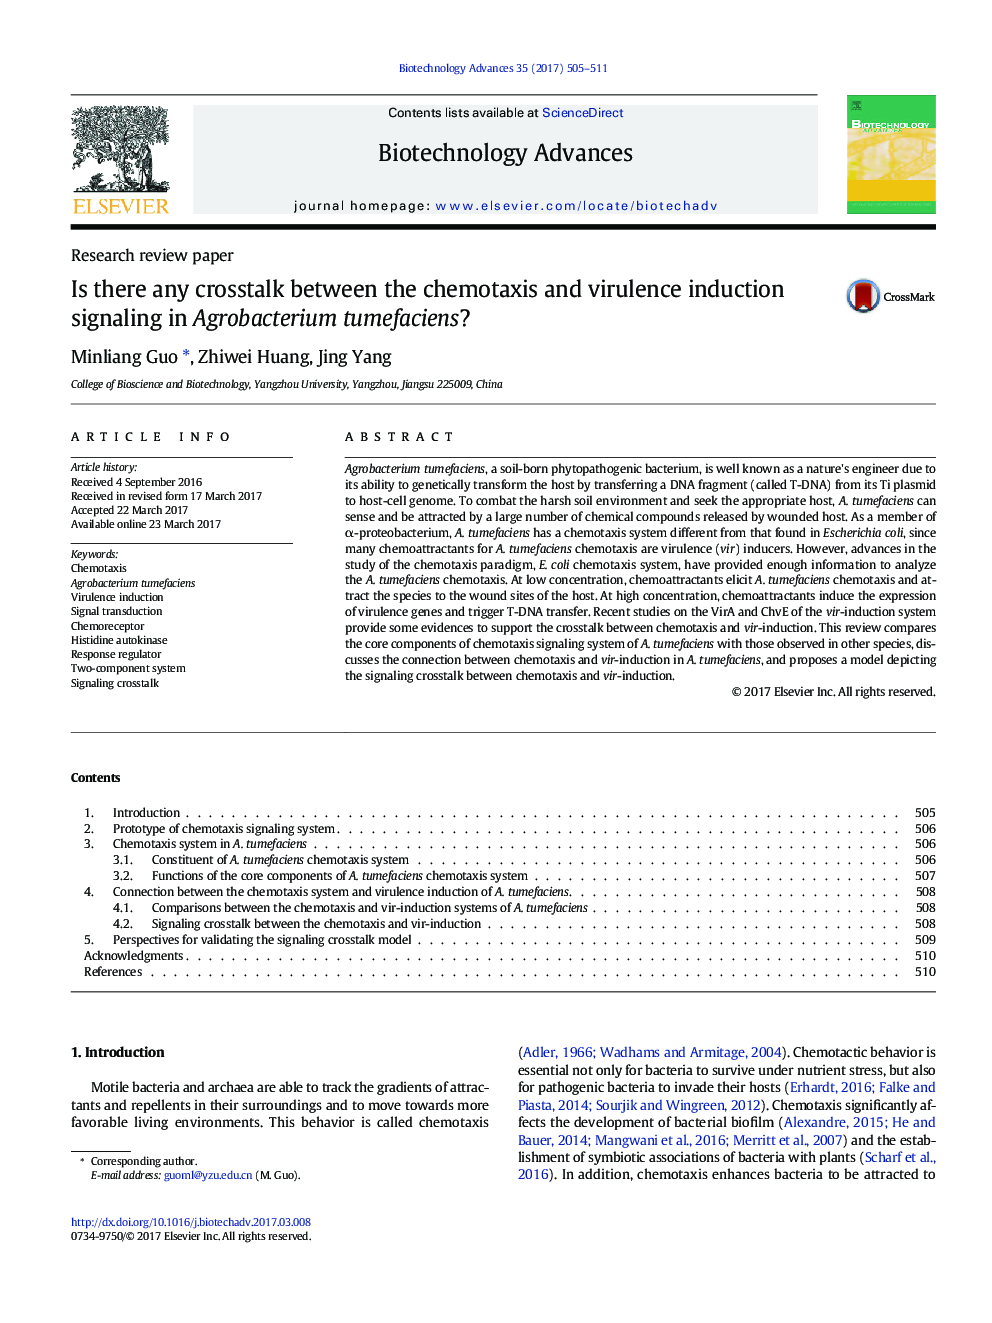 Research review paperIs there any crosstalk between the chemotaxis and virulence induction signaling in Agrobacterium tumefaciens?